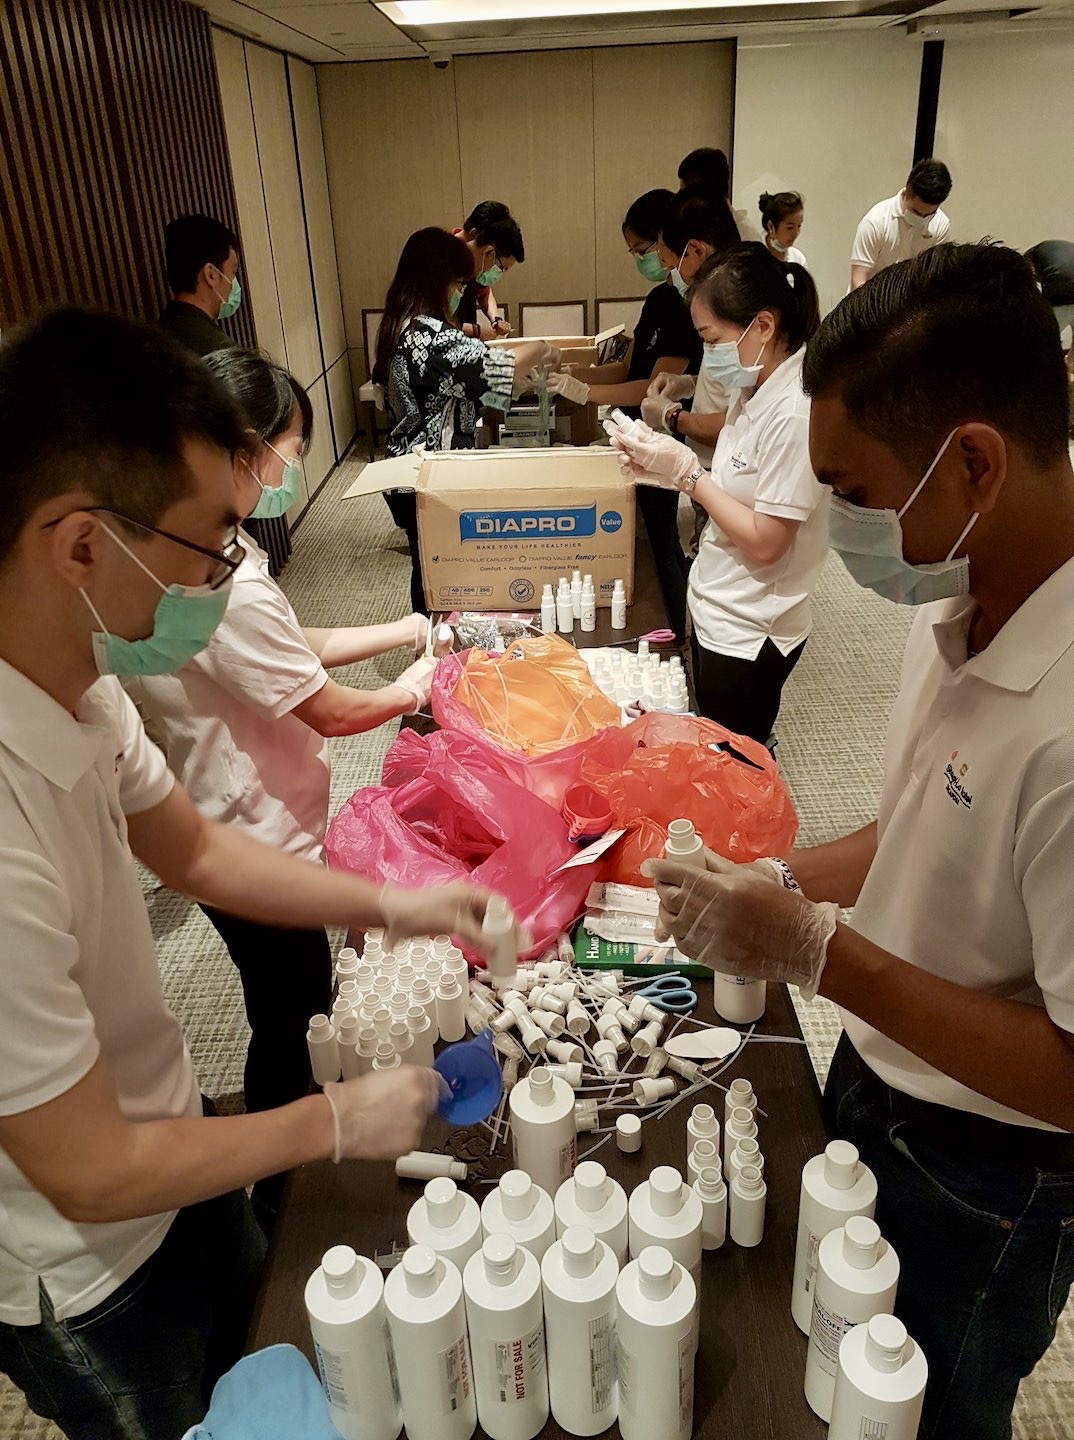 Volunteers from Care Corner and Shangri-La Hotel putting together the care packs for vulnerable seniors. Photo from Shangri-La Hotel, Singapore's Facebook page.